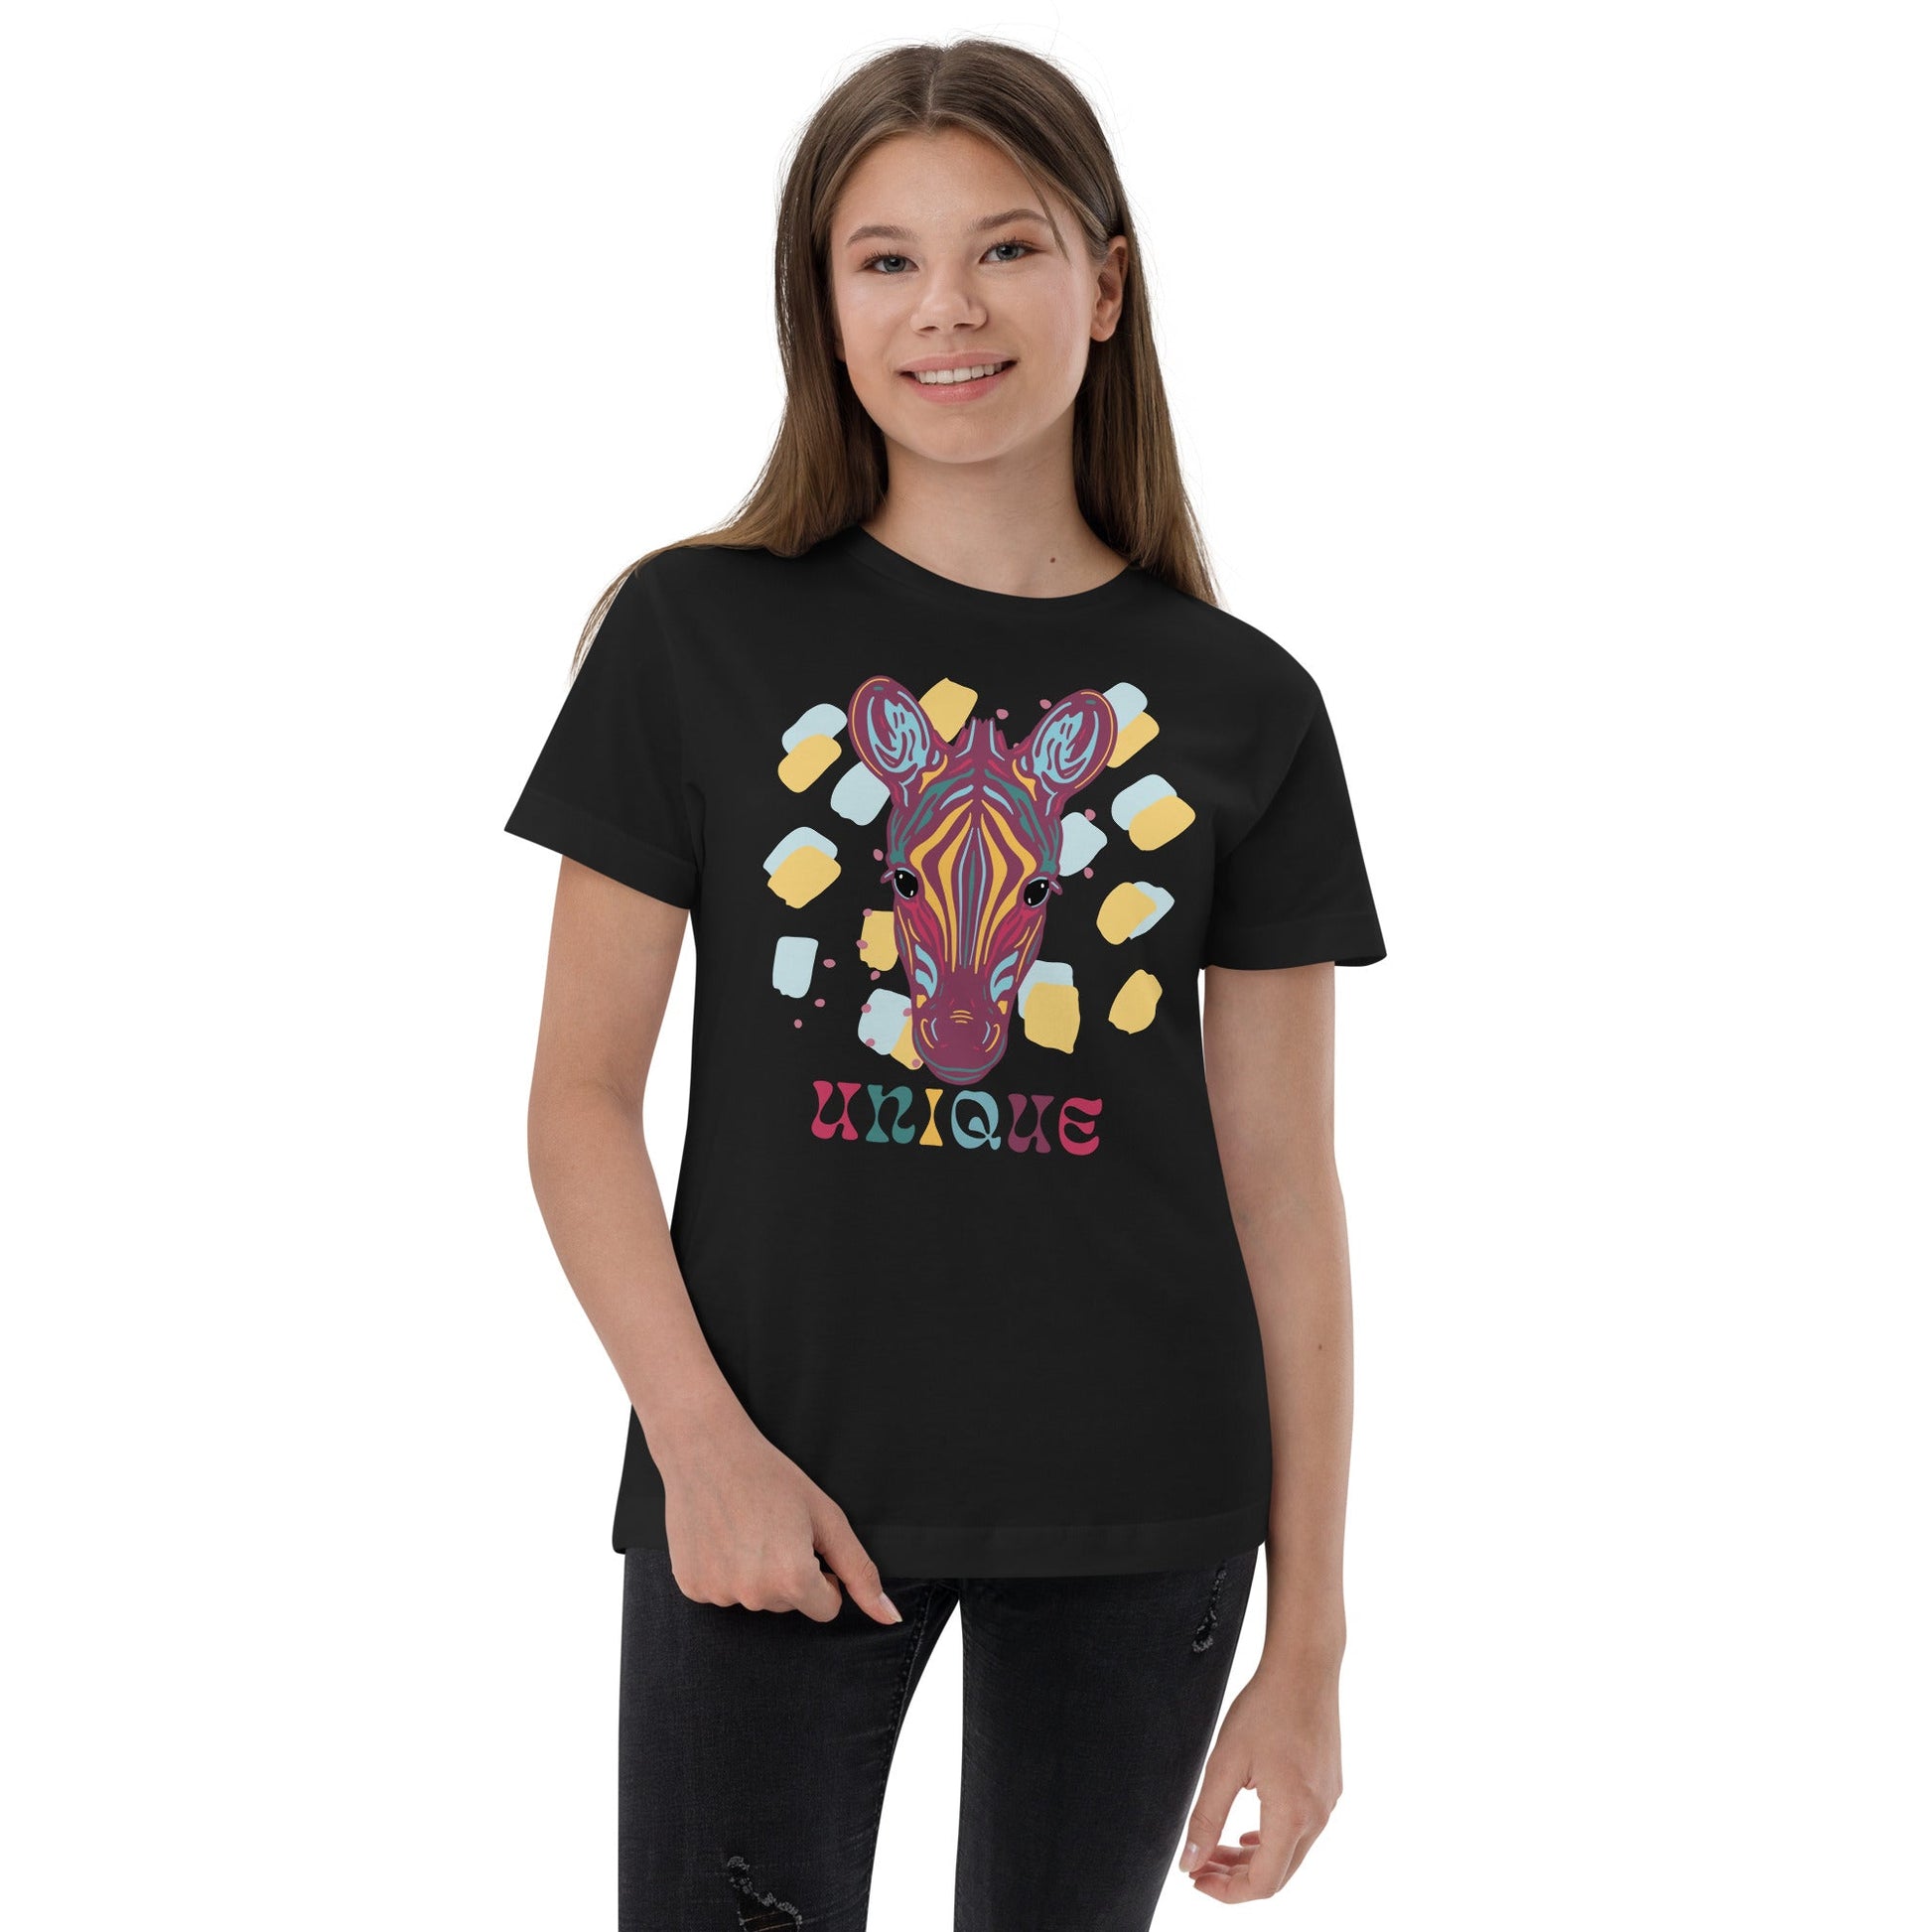 Unique Zebra 🦓 Kids T-Shirt T-Shirt from Wildly Bright